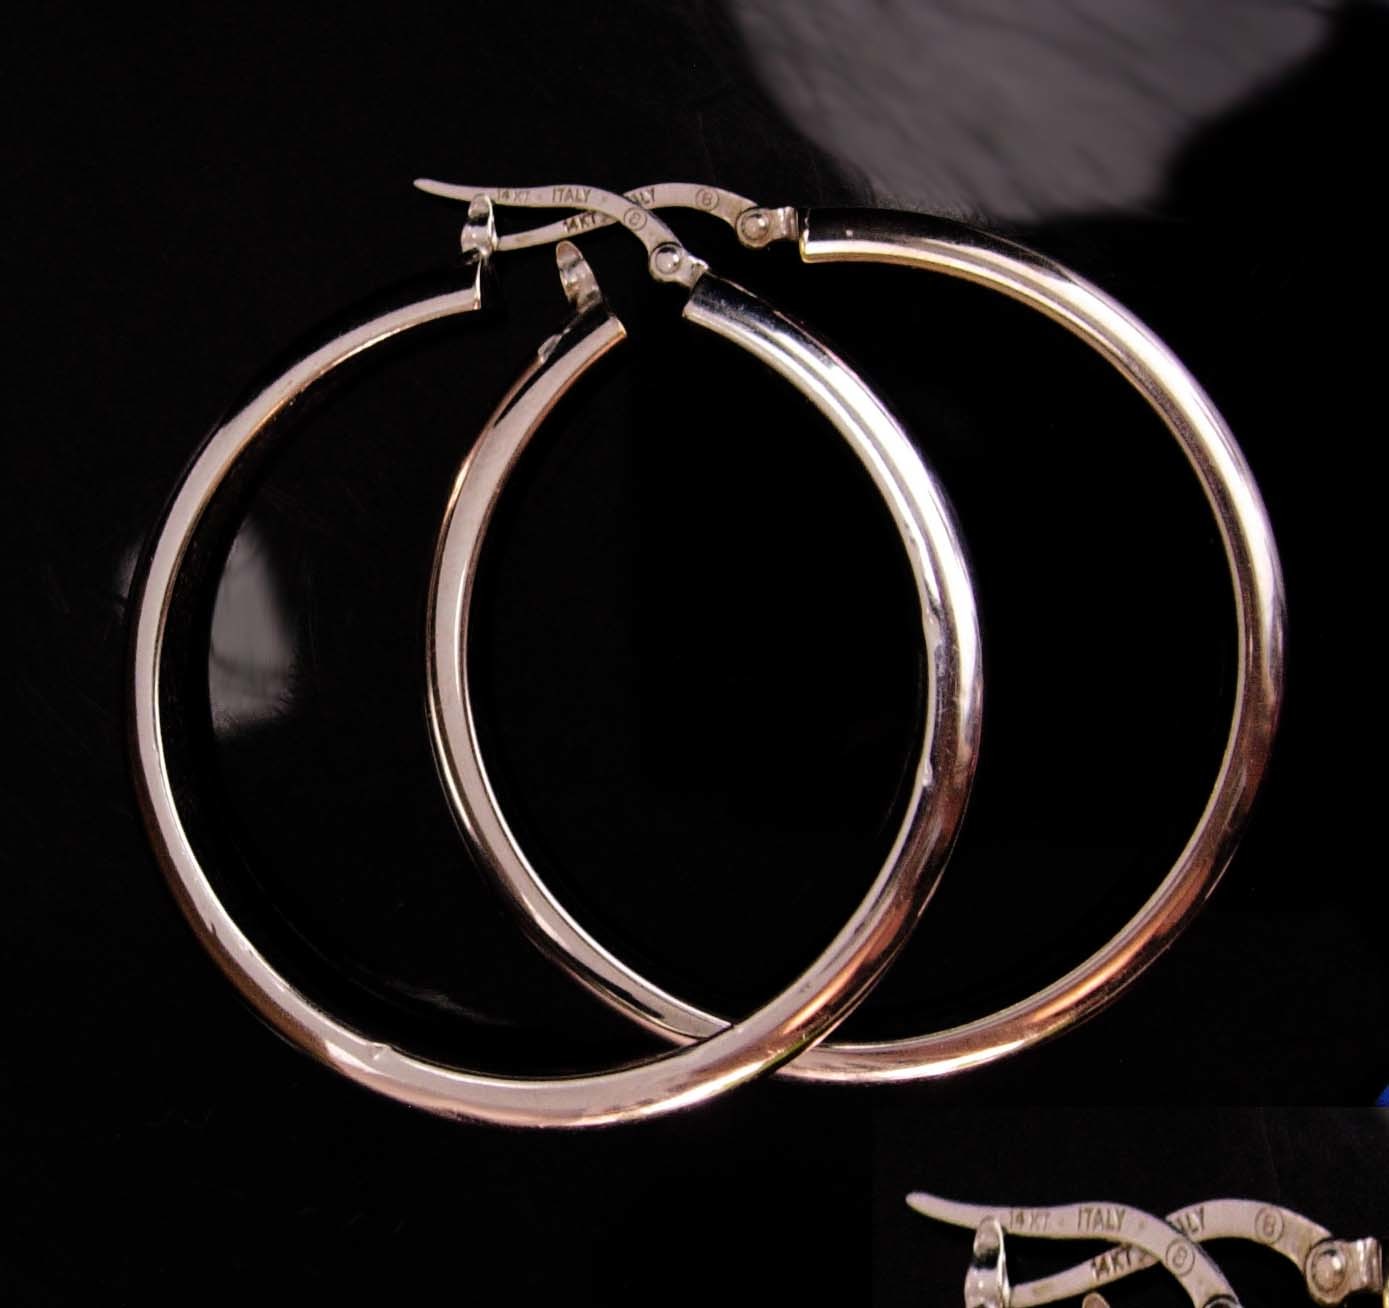 Primary image for 14k GOLD Earrings large white gold hoops Italian pierced gold Jewelry boho gypsy